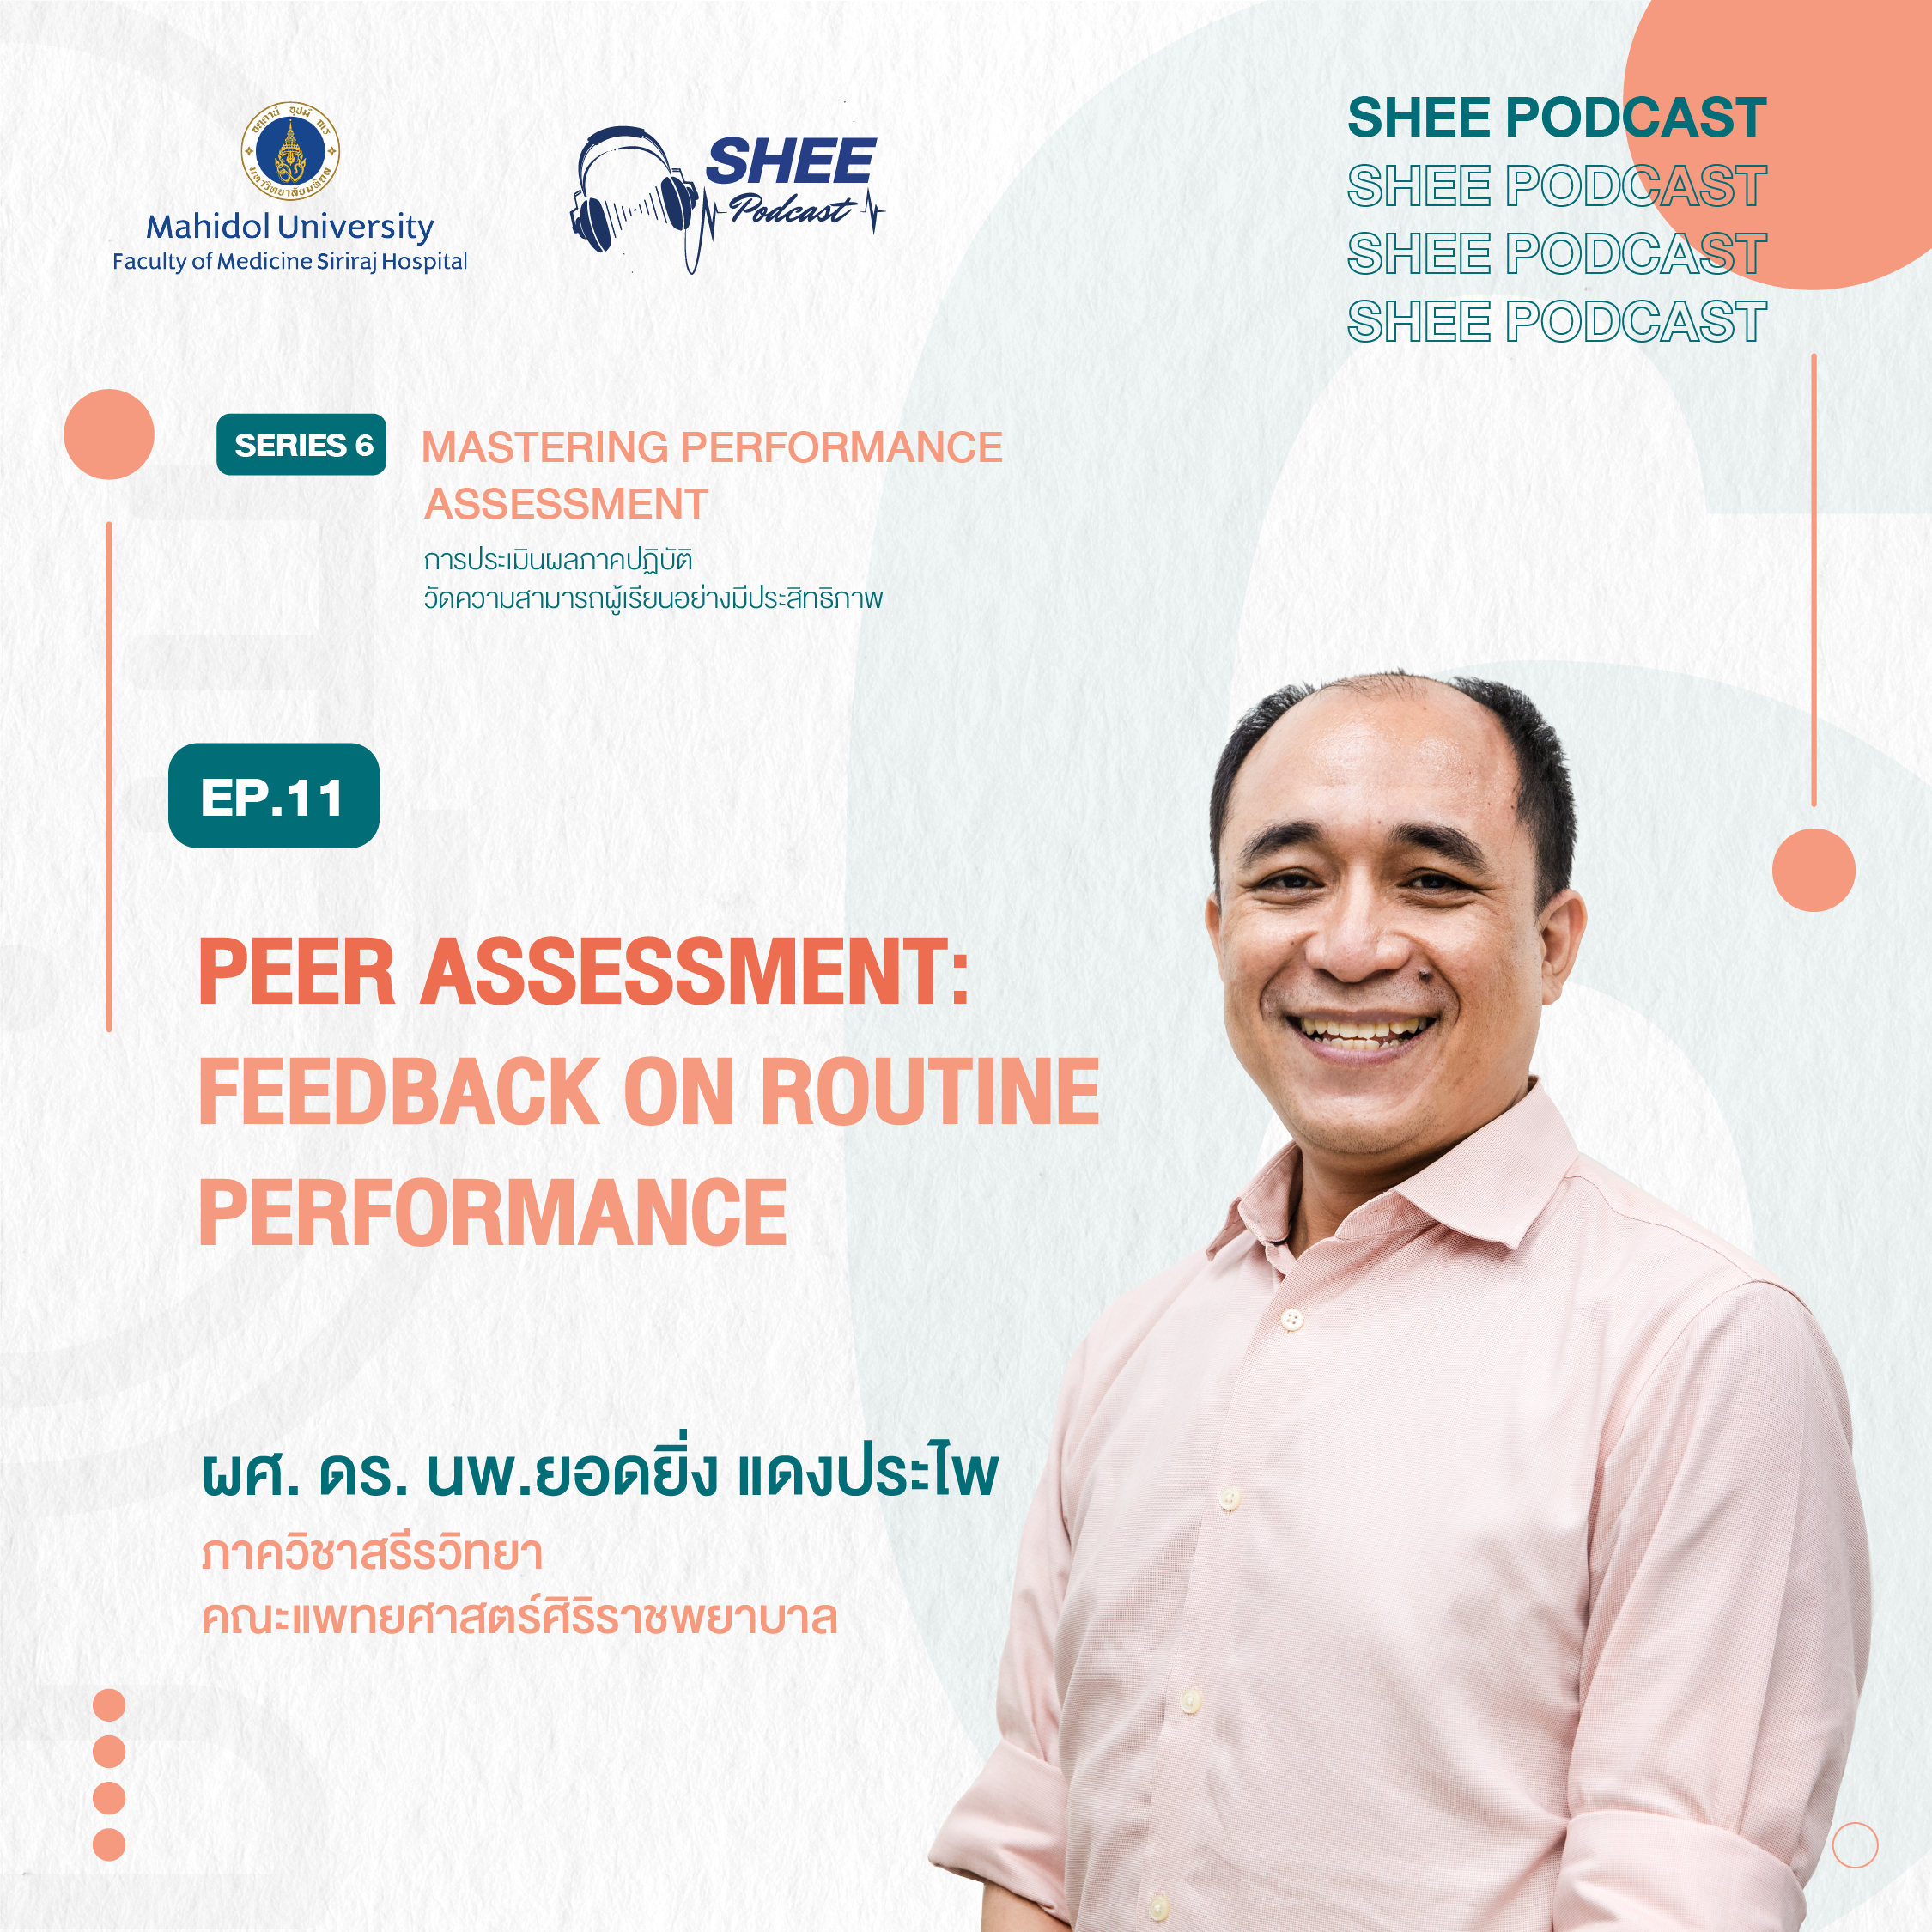 EP11 : Peer assessment: feedback on routine performance